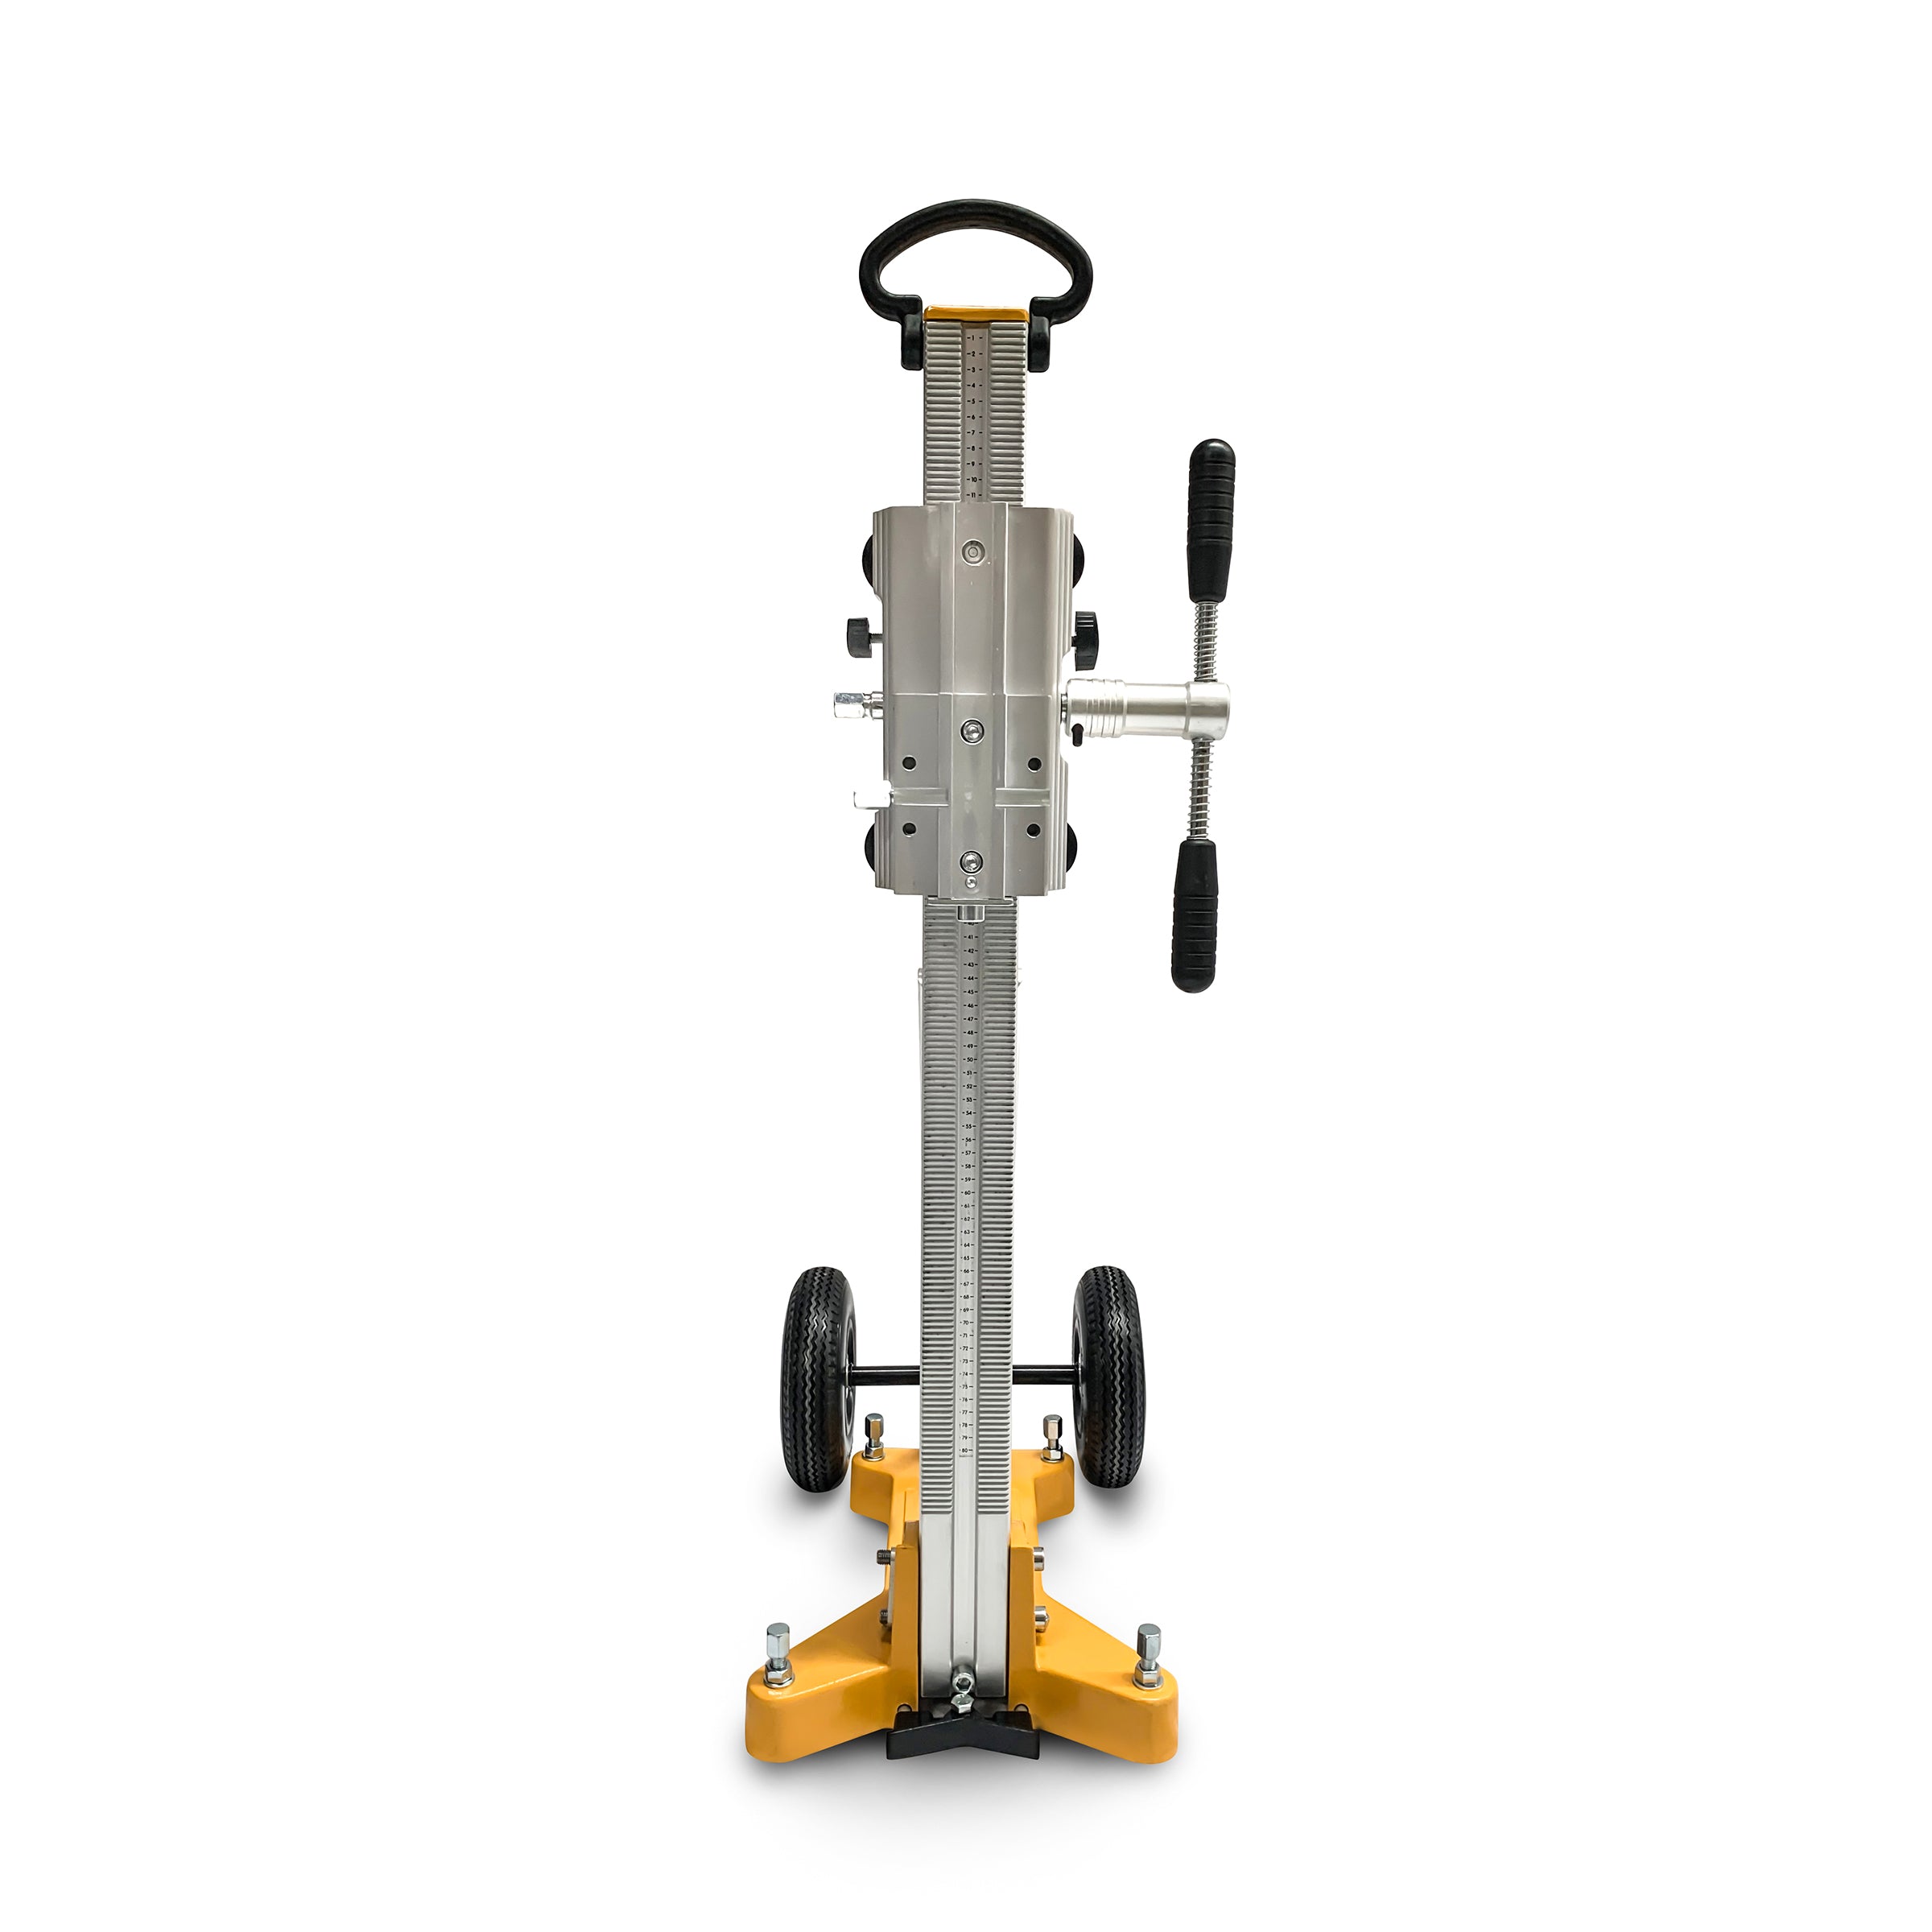 core drill stands bases wheels frames